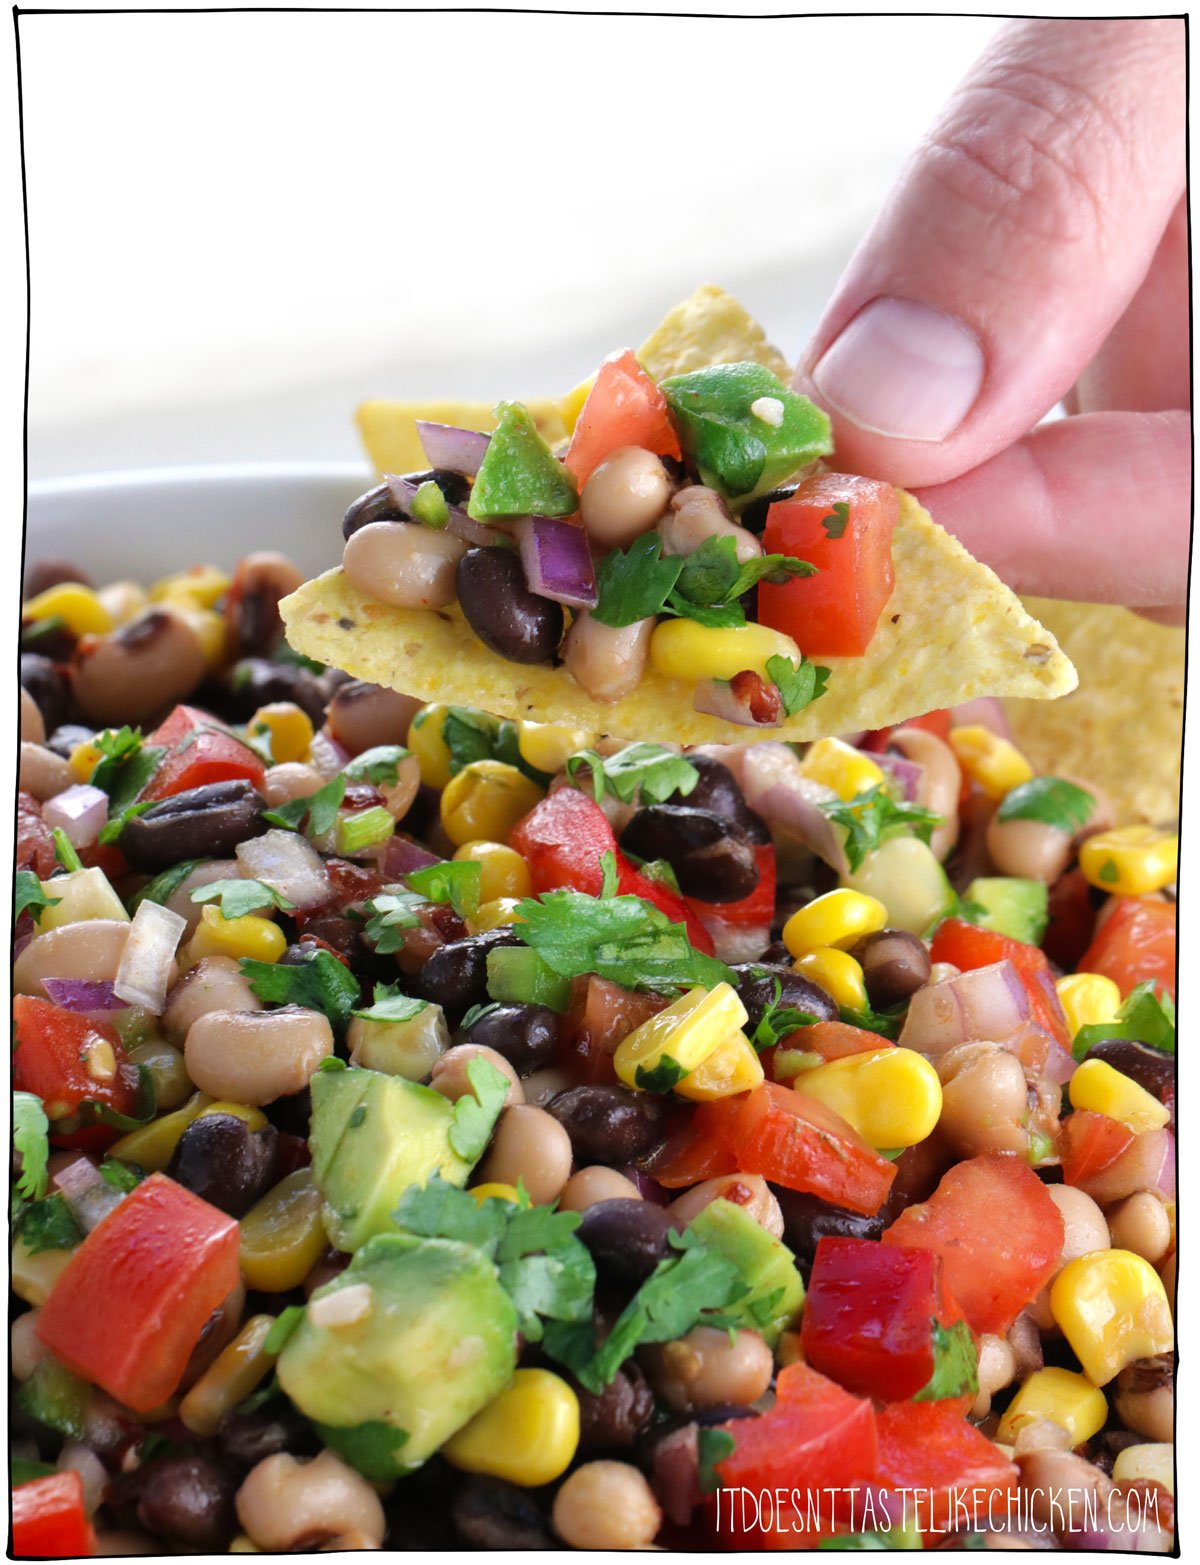 The Best Cowboy Caviar is super quick and easy to whip up and can be enjoyed as a dip with tortilla chips or could be served as a side dish. With a zesty lime and smoky chipotle dressing, this recipe is perfect for potlucks or BBQ's. This delicious summer appetizer is a real crowd pleaser! #itdoesnttastelikechicken #veganrecipe #potluck